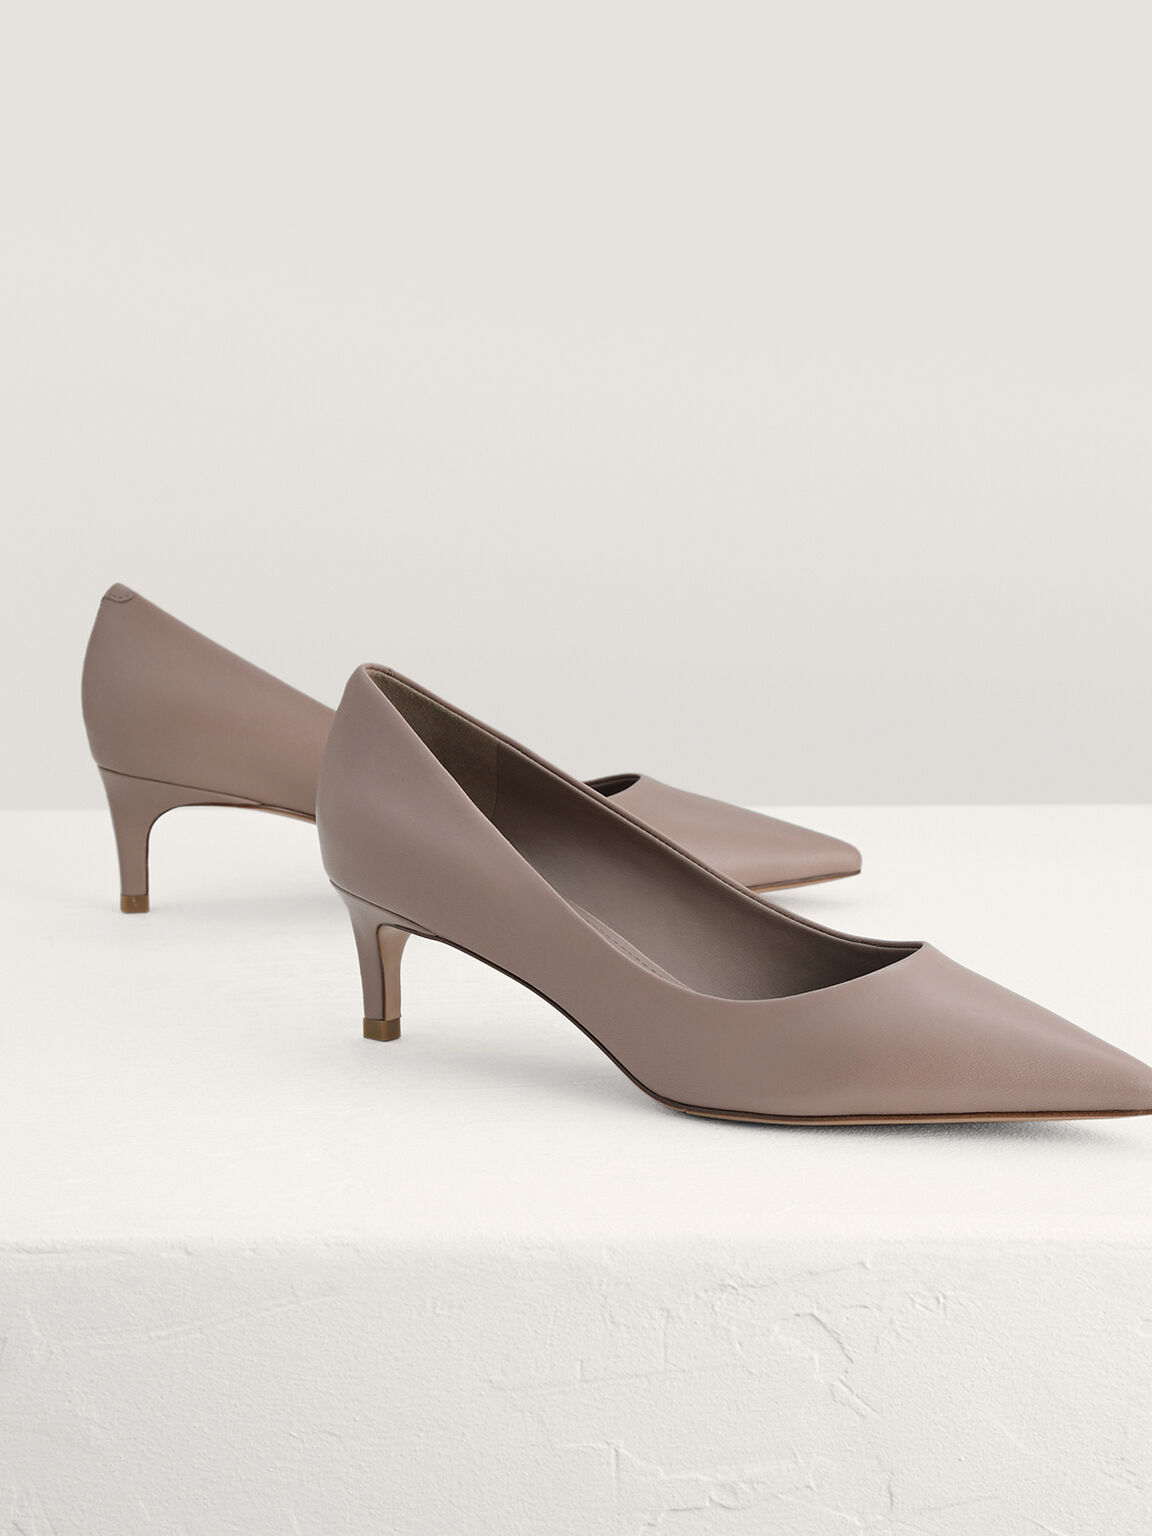 Leather Pointed Pumps, Taupe, hi-res